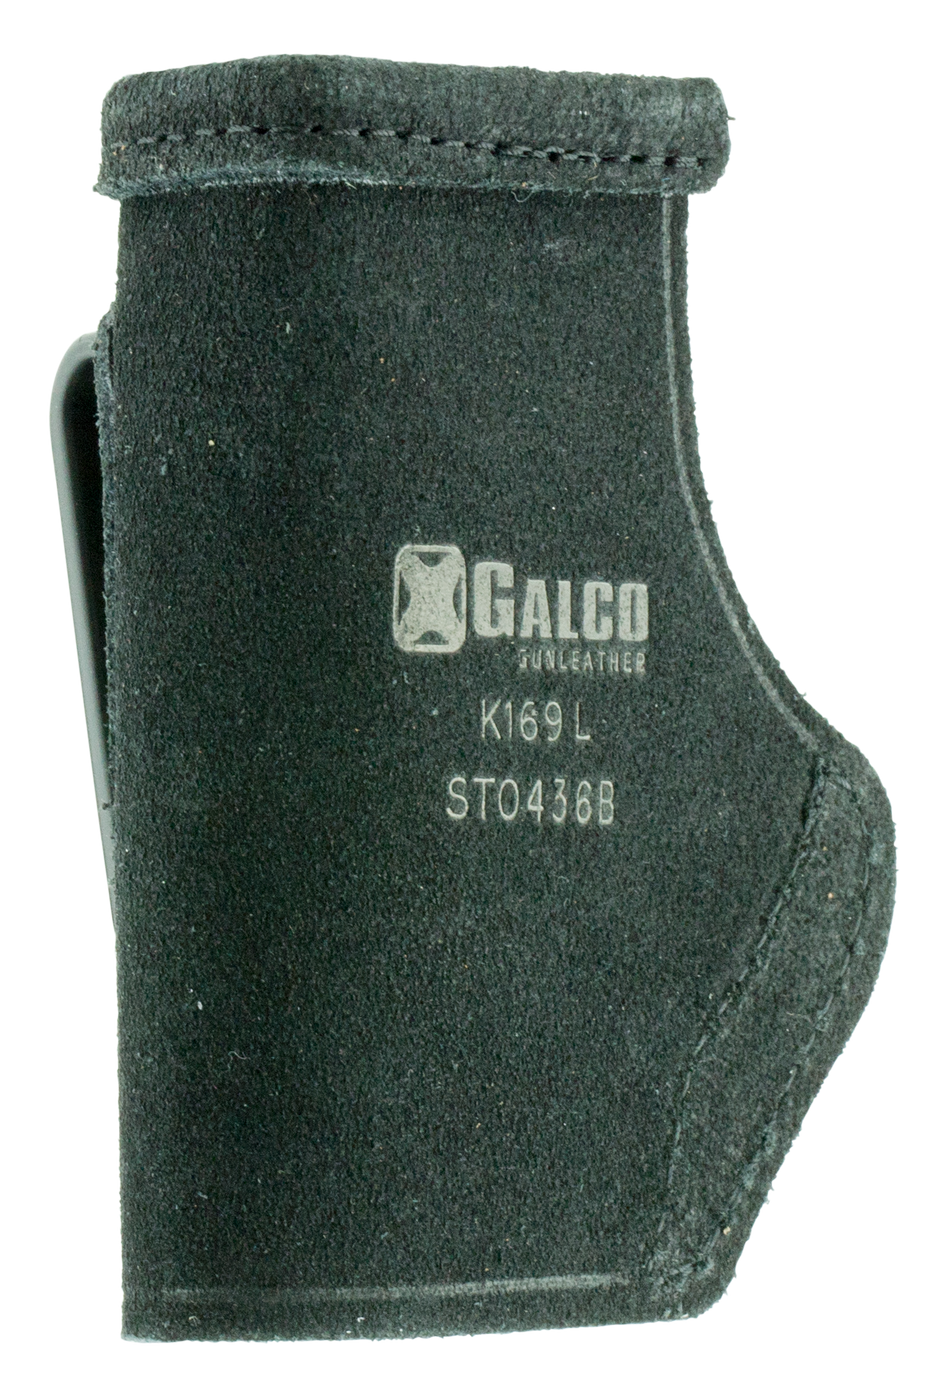 Galco Stow-n-go, Galco Sto436b Stow-n-go Lcp        Blk